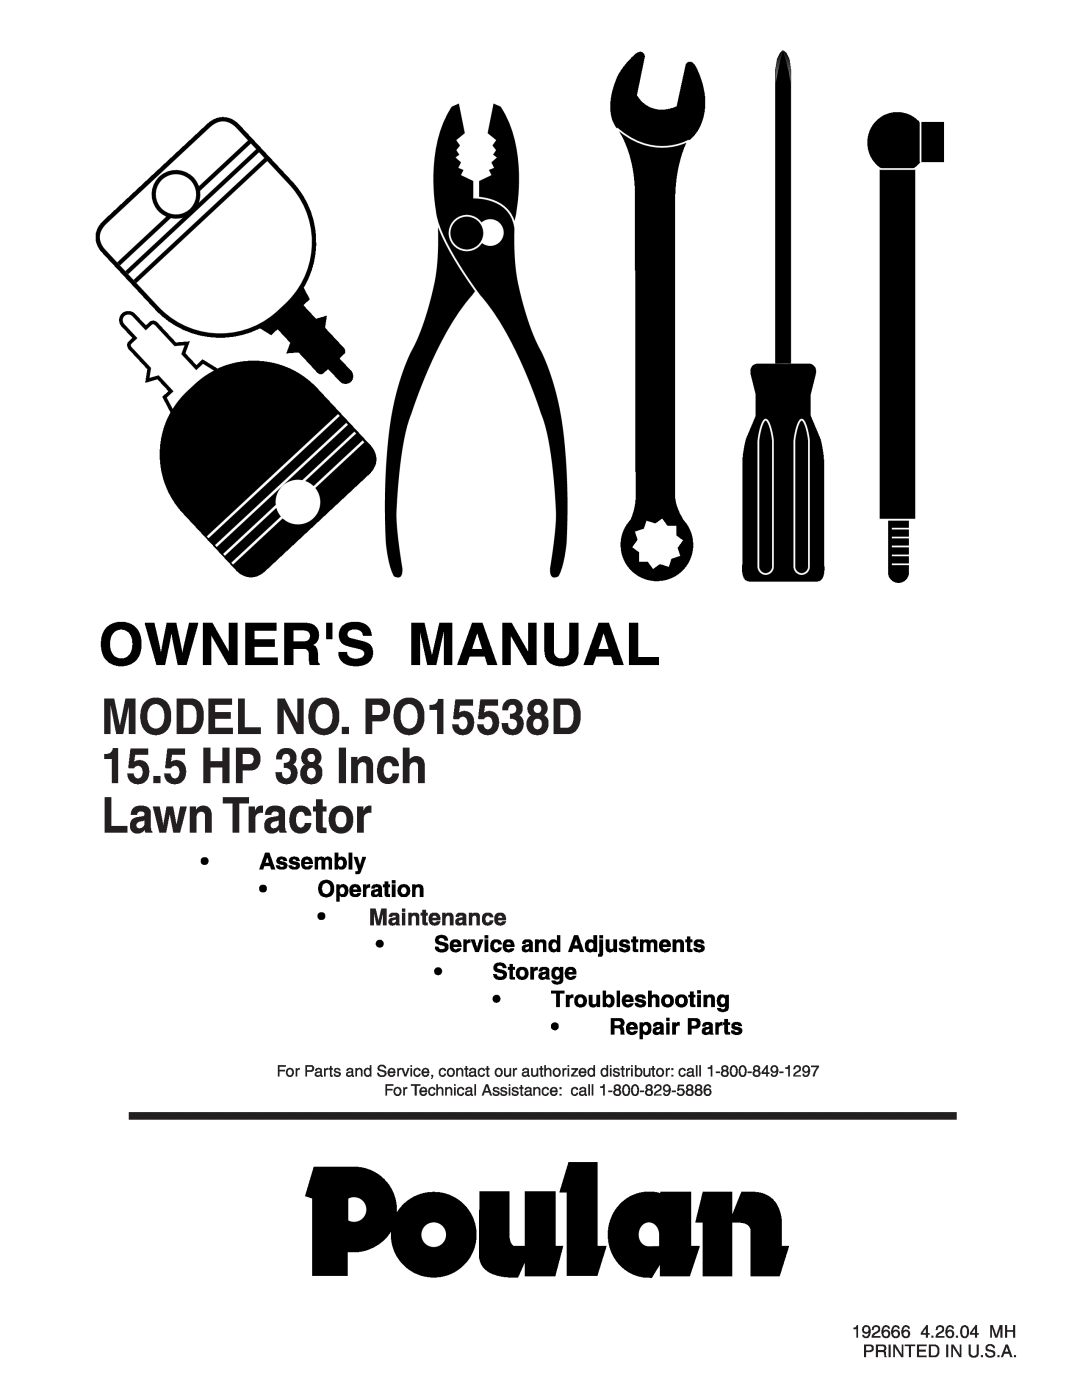 Poulan 192666 manual MODEL NO. PO15538D 15.5HP 38 Inch Lawn Tractor 